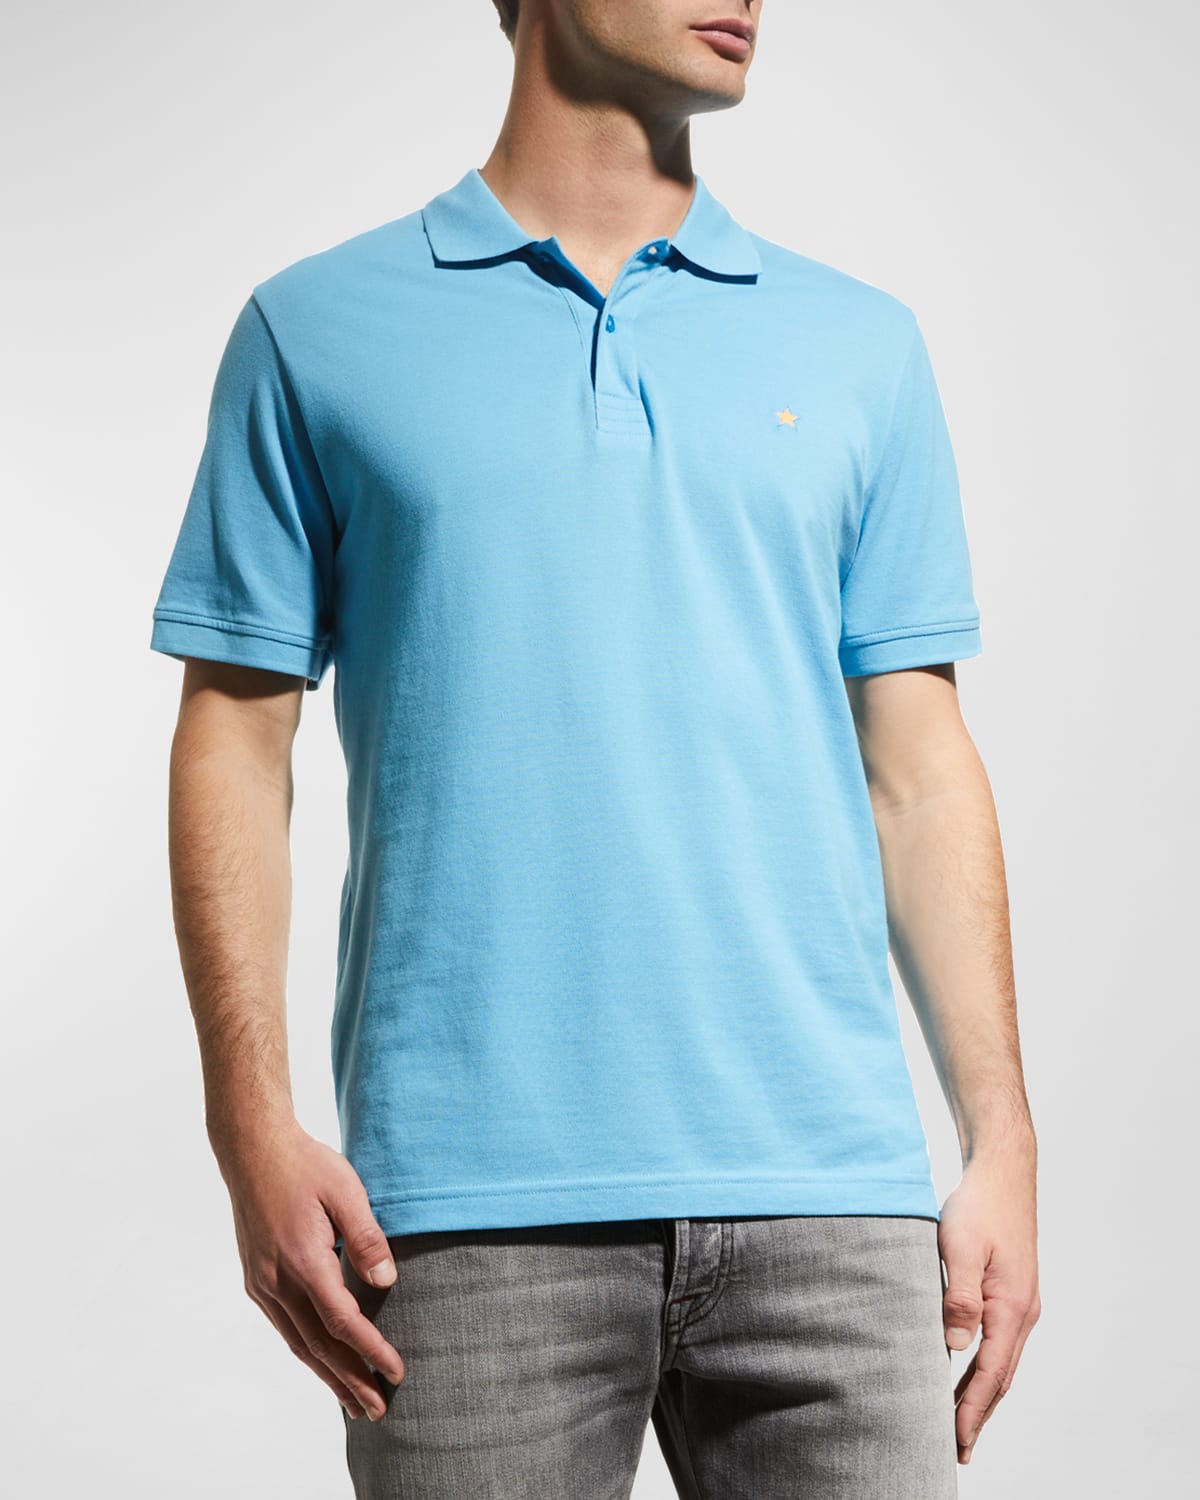 Jared Lang Men's Star Knit Pima Cotton Piqué Polo Shirt In Turquoise